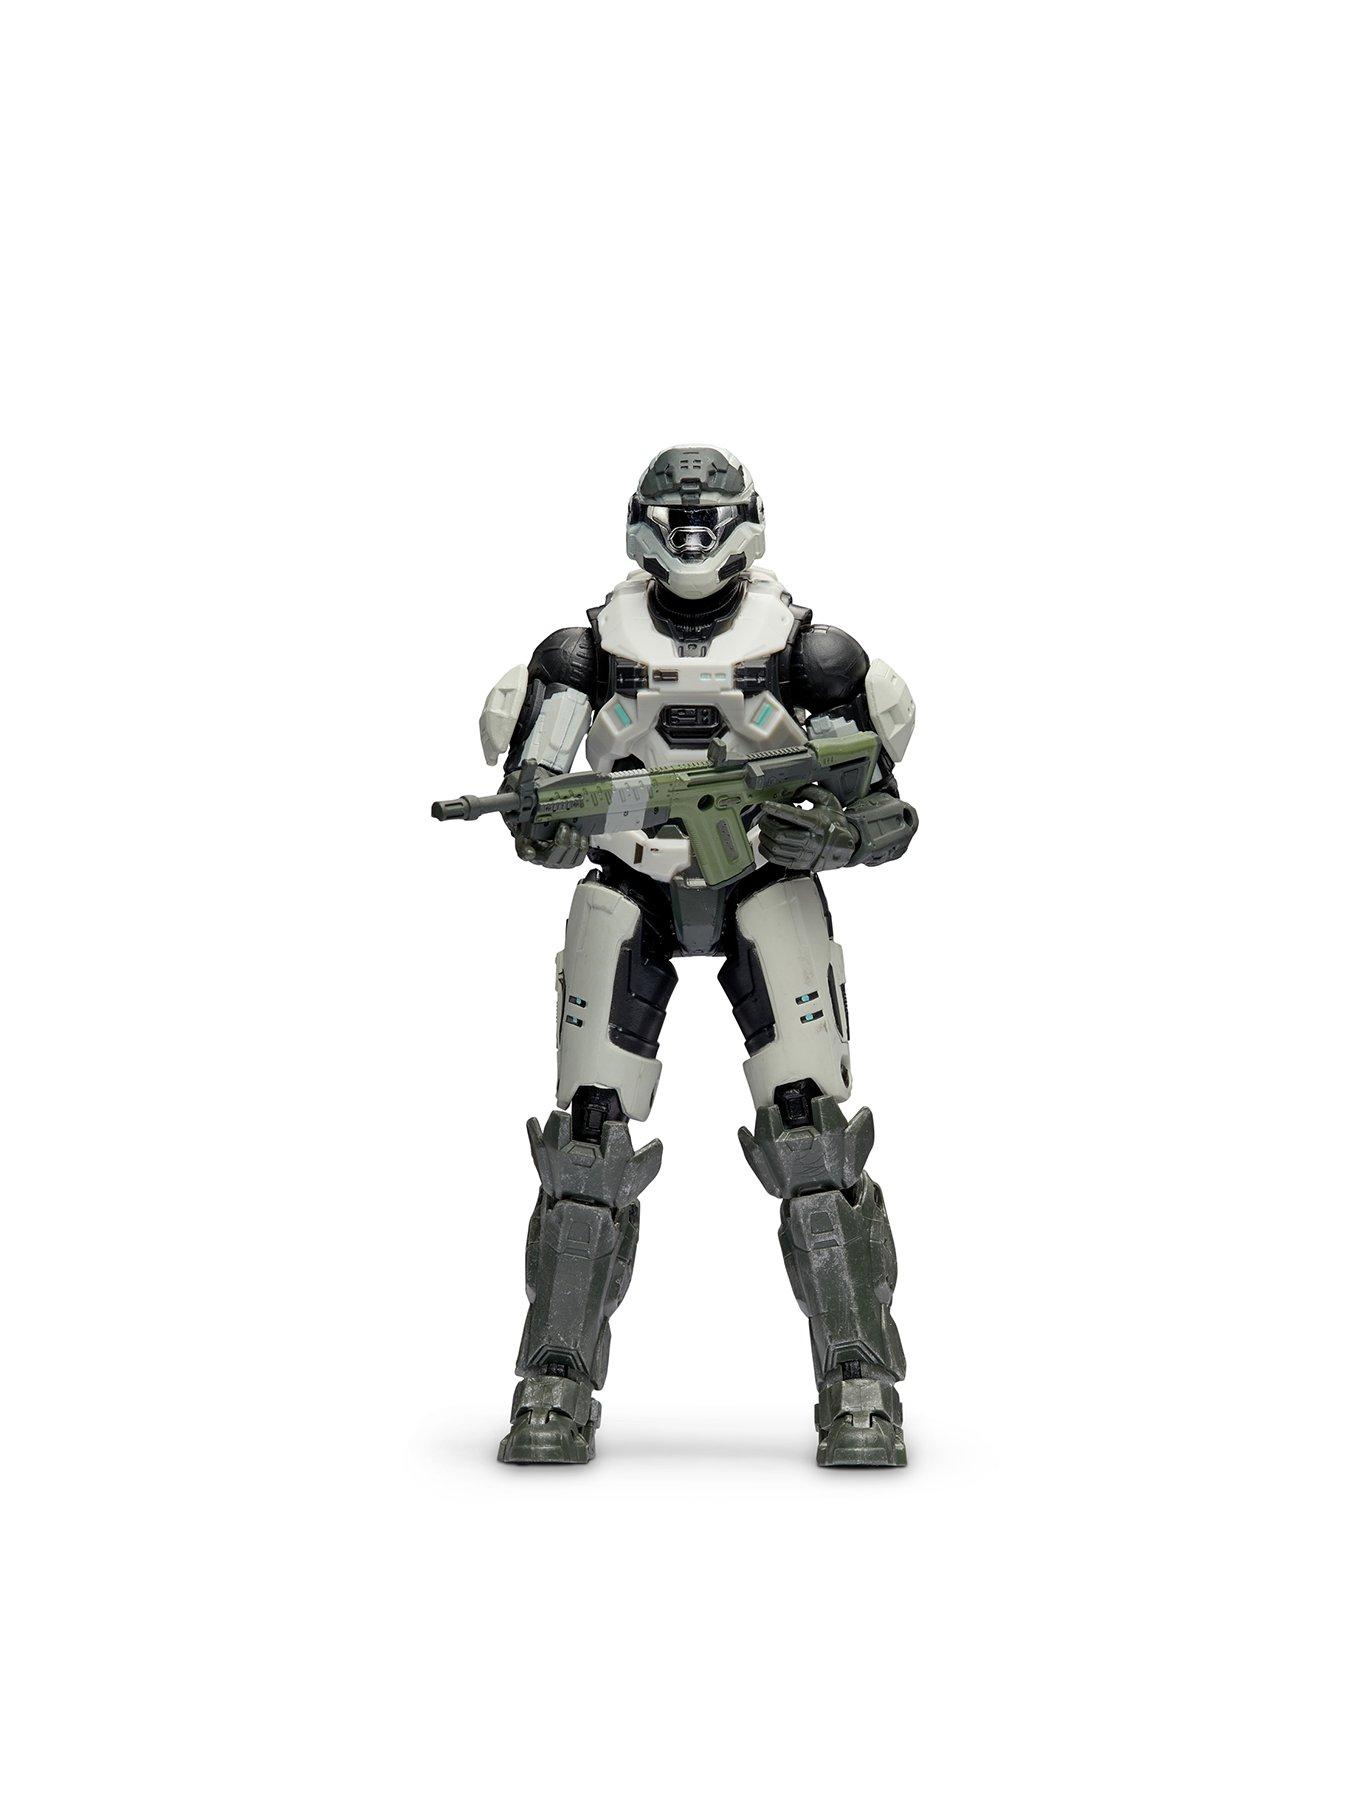 Details about   Halo 4" World of Halo Two Figures Pack New Toy Kid Gift 